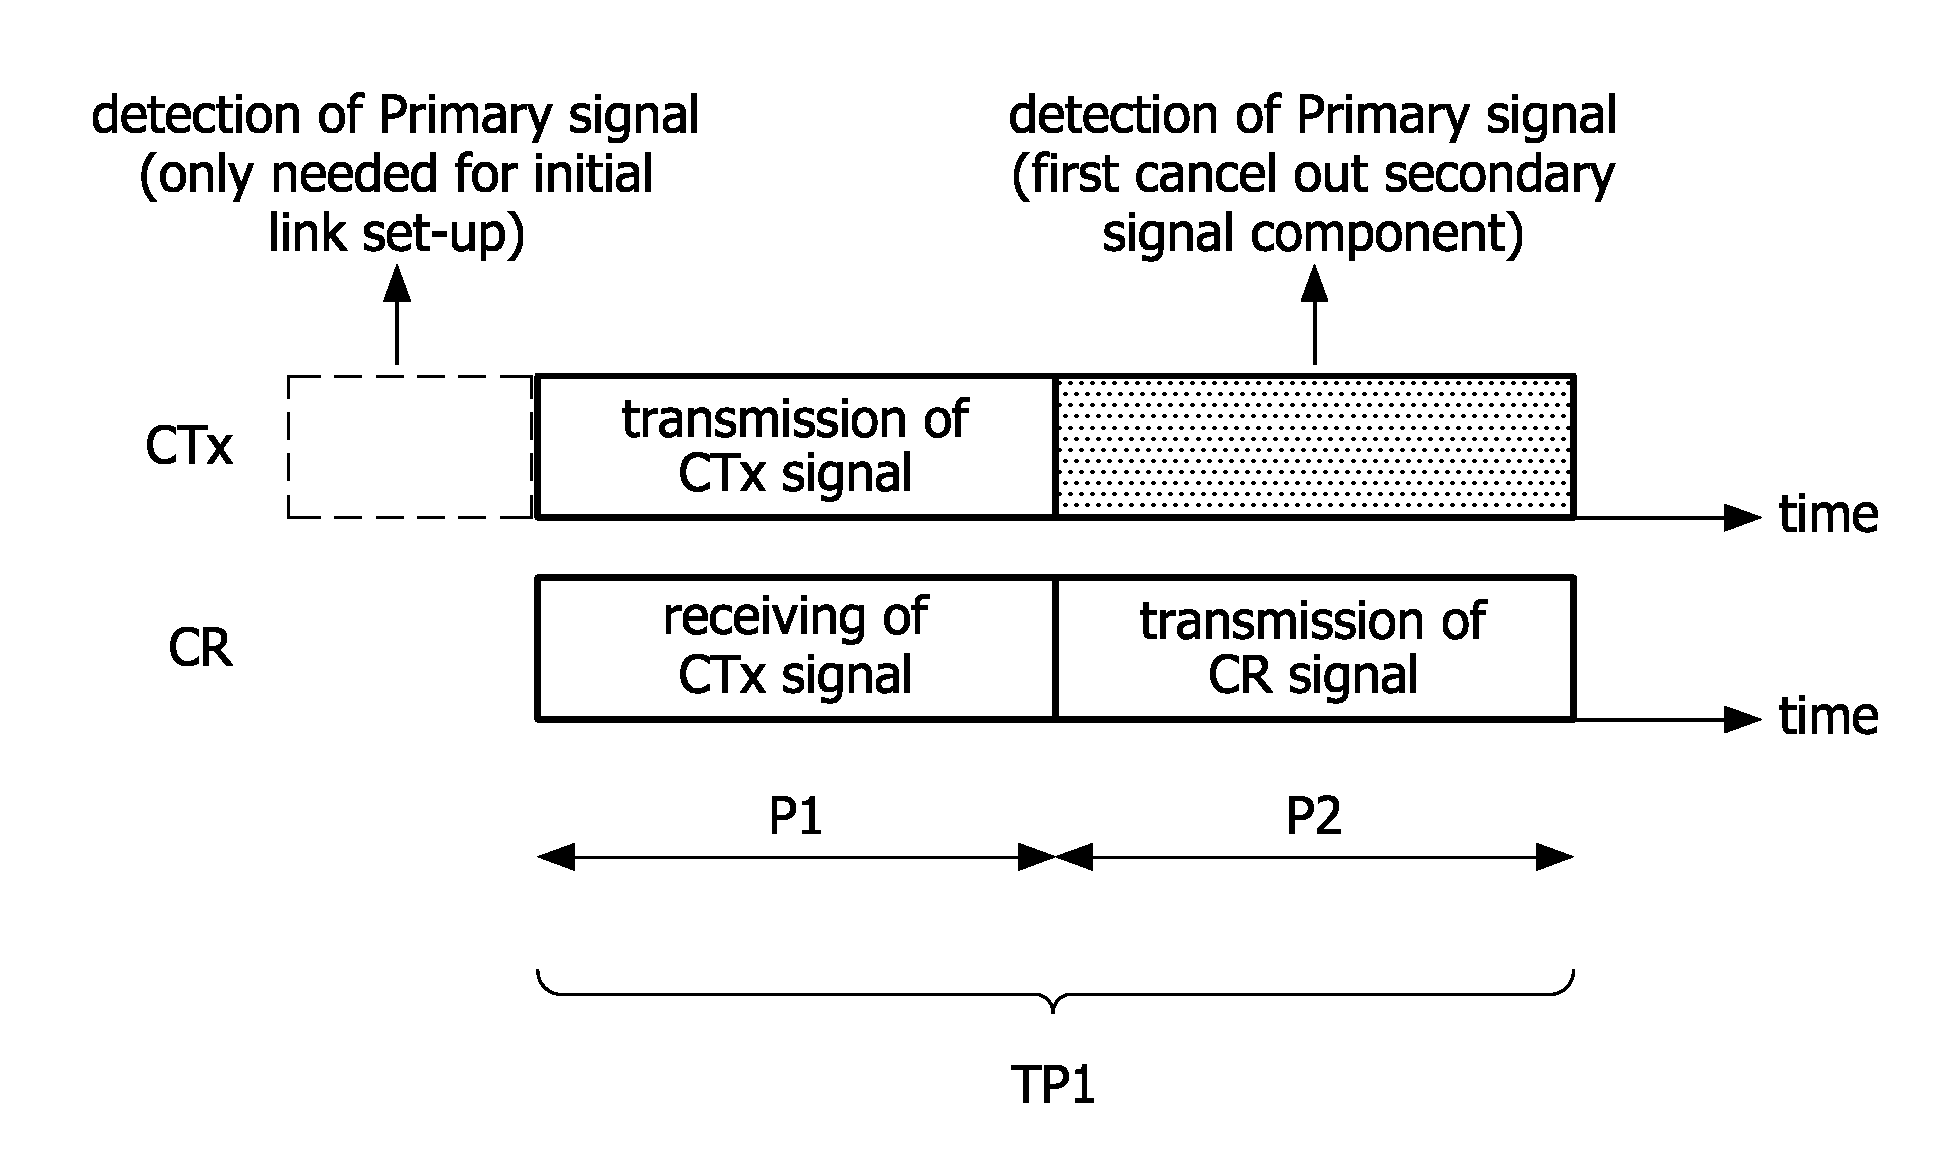 Sensing and communication protocols for shared spectrum usage in a radio cognitive relay system